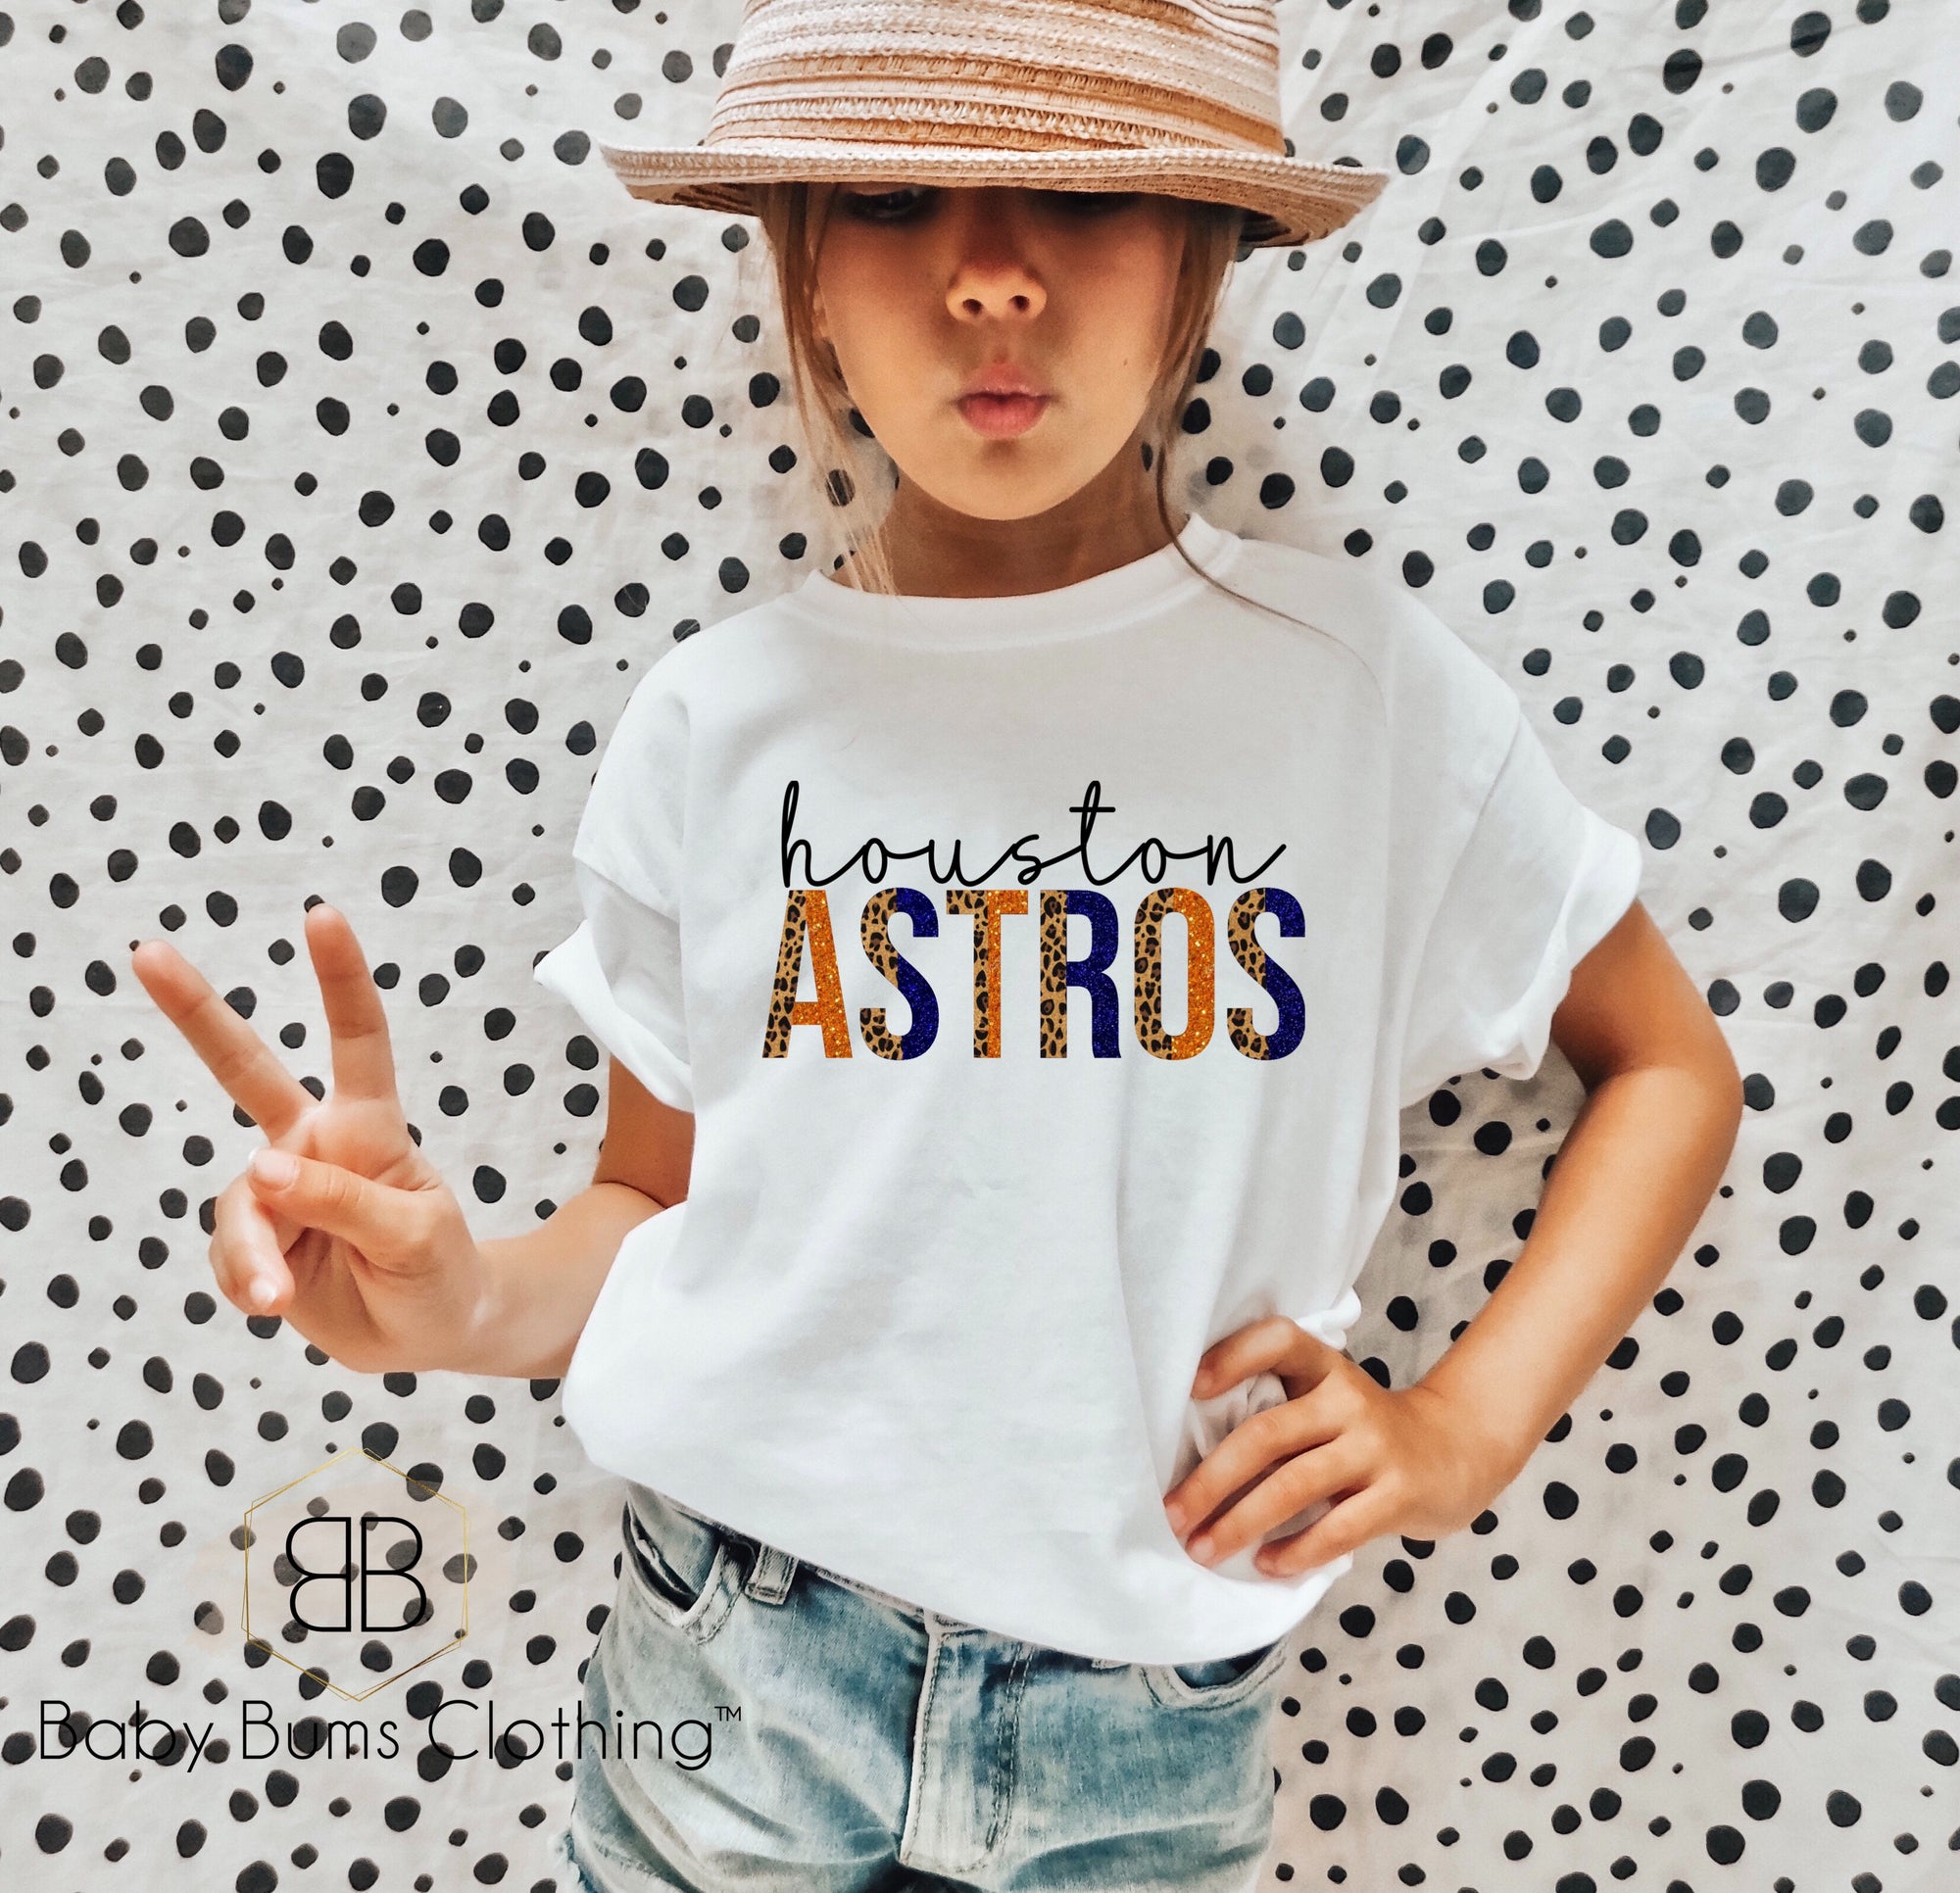 HOUSTON A LEOPARD T-SHIRT - Baby Bums Clothing 